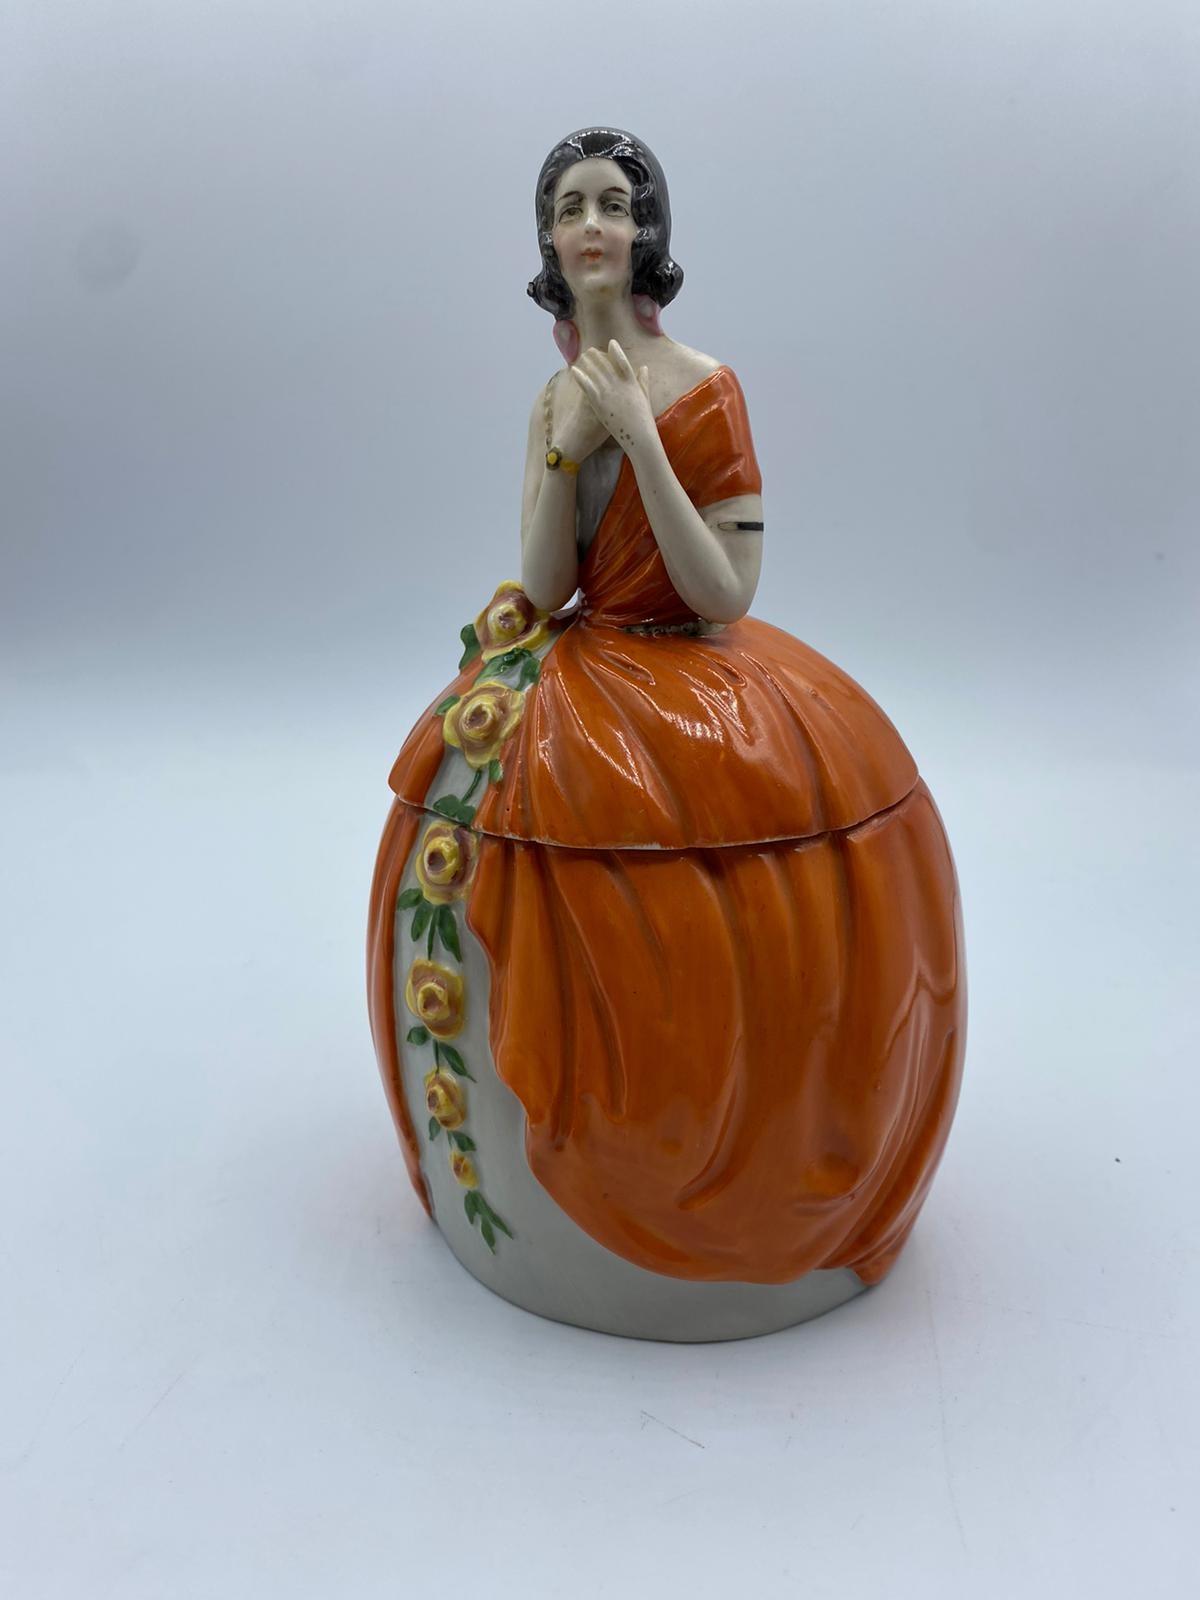 Vintage pair of Ceramic powder boxes in the form of ladies in orange and purple ballgown dresses - Image 11 of 20